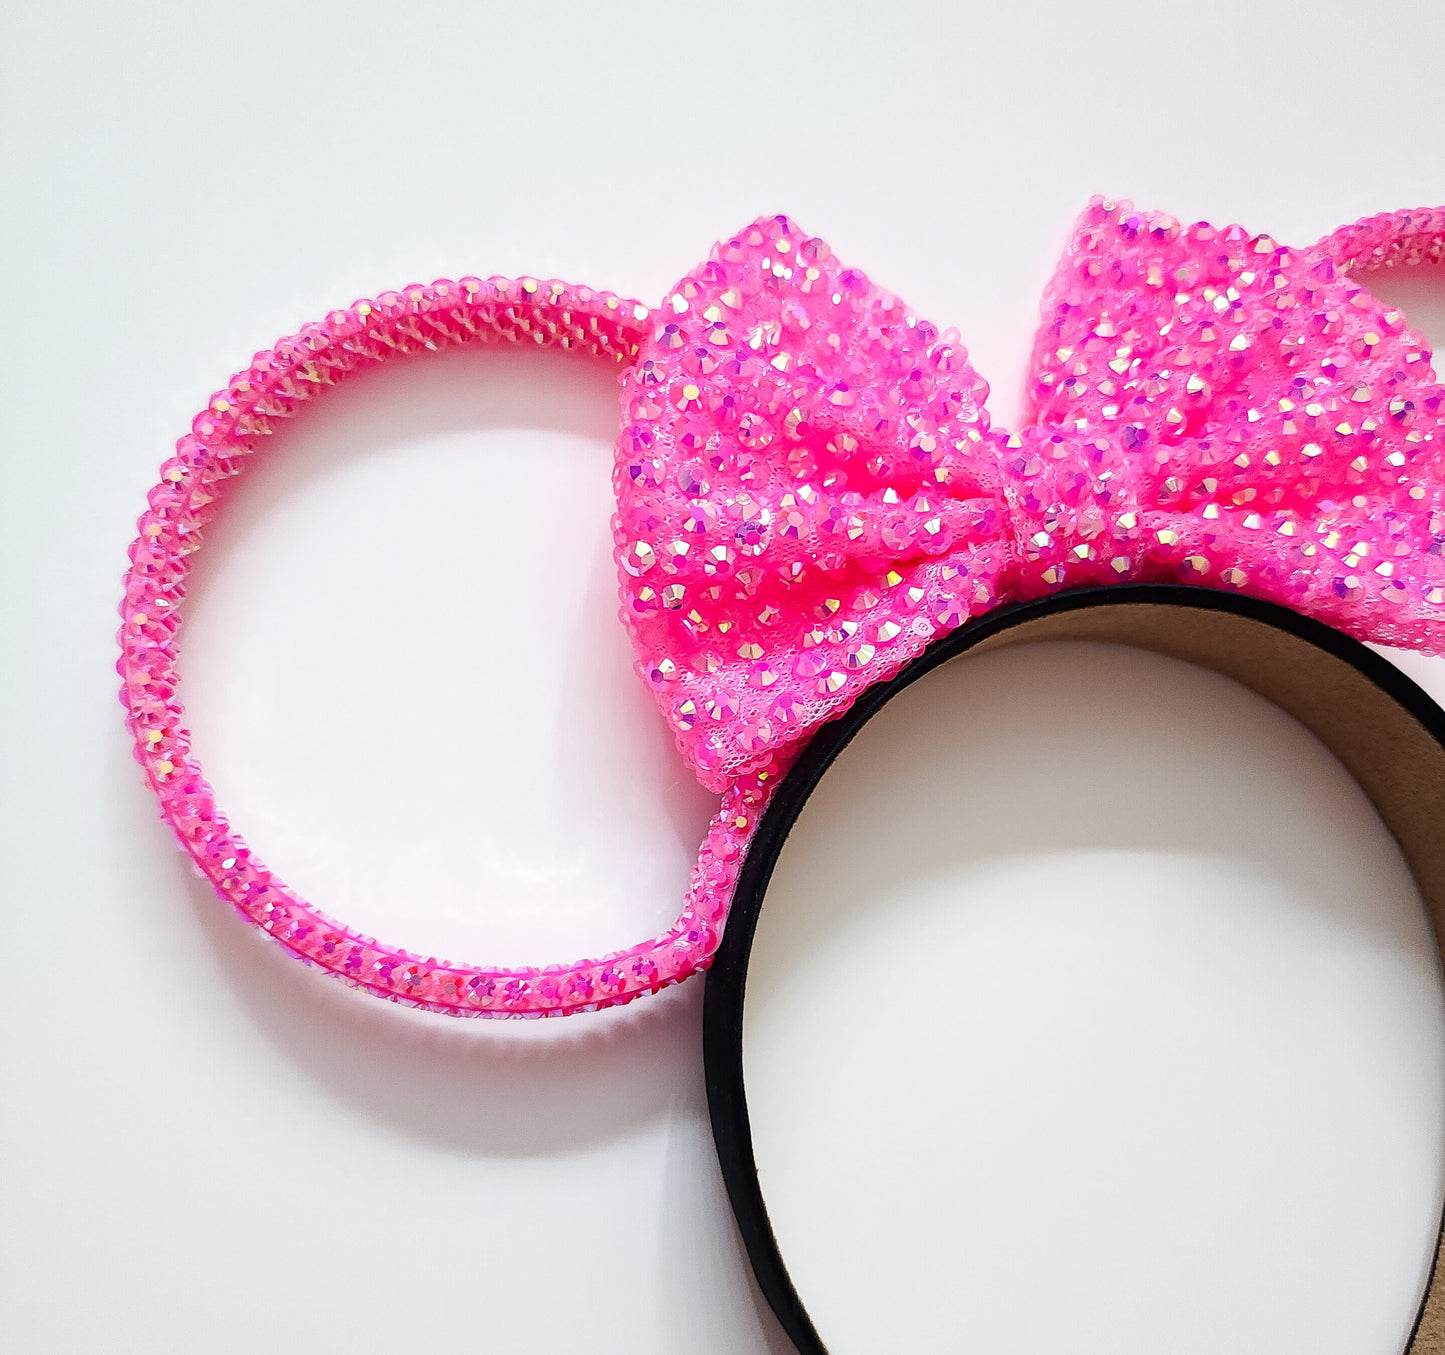 Magic Mountain ears ORIGINAL design- hot pink jelly/resin Rhinestone rings WITH hot pink jelly rhinestone bow 3D Mouse Ears